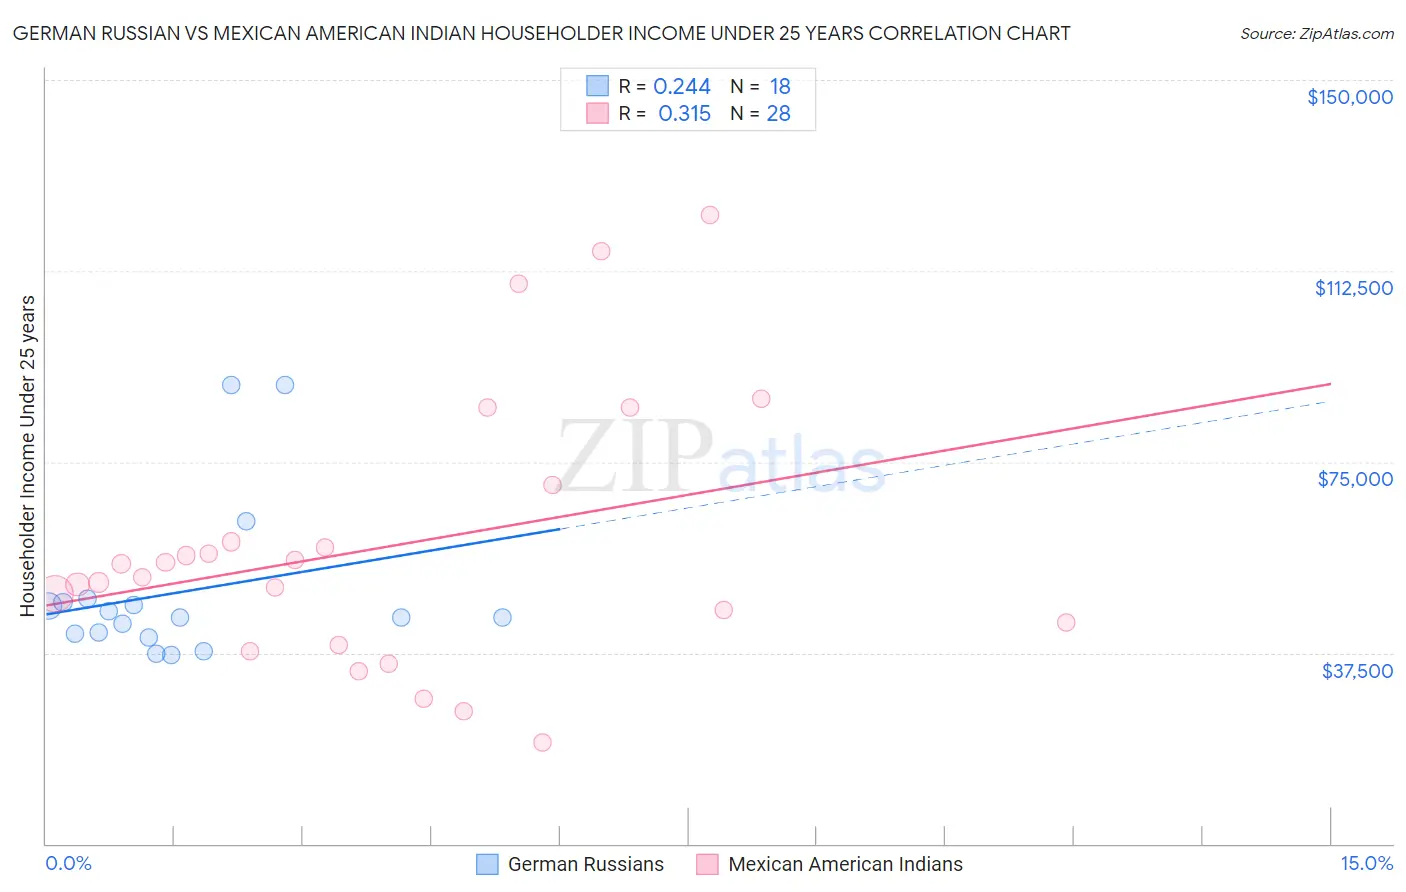 German Russian vs Mexican American Indian Householder Income Under 25 years